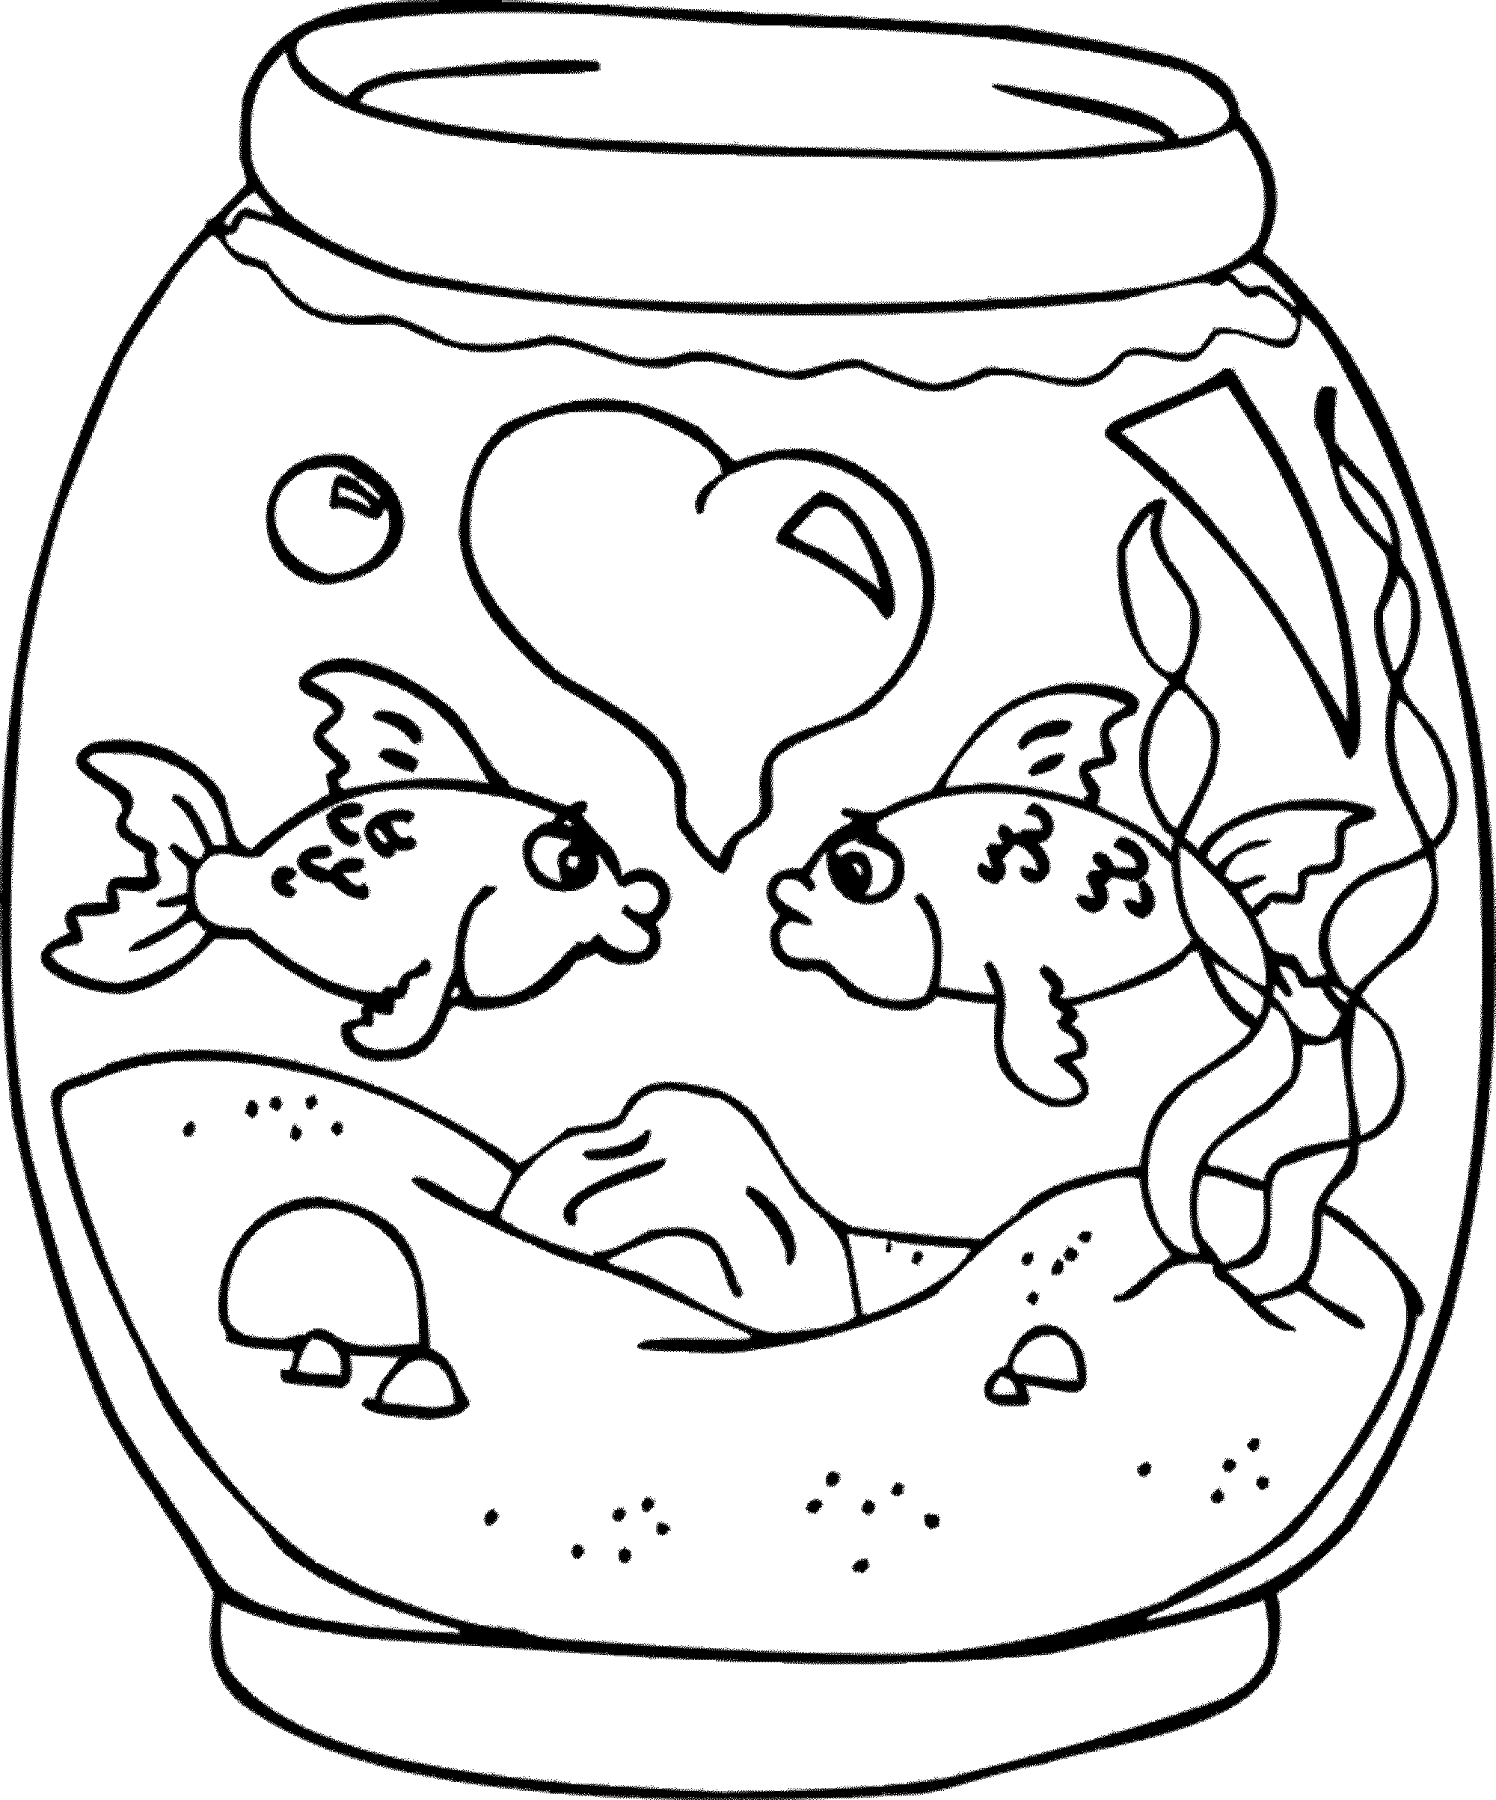 Fish Coloring Page 2016 Printable | Activity Shelter